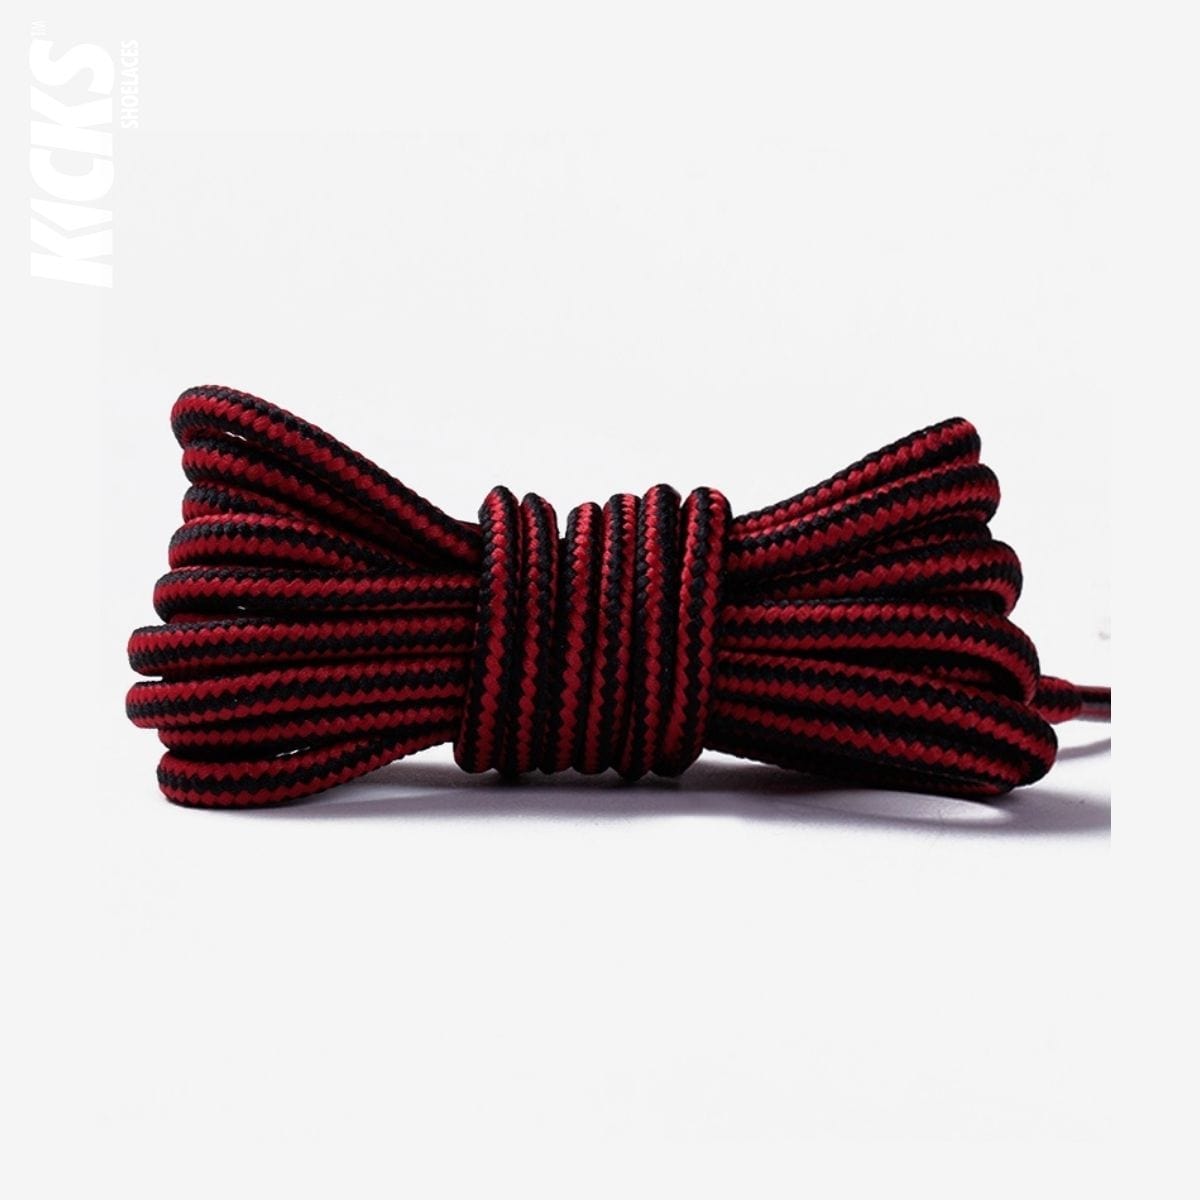 striped-two-color-shoelaces-for-casual-shoes-in-red-and-black